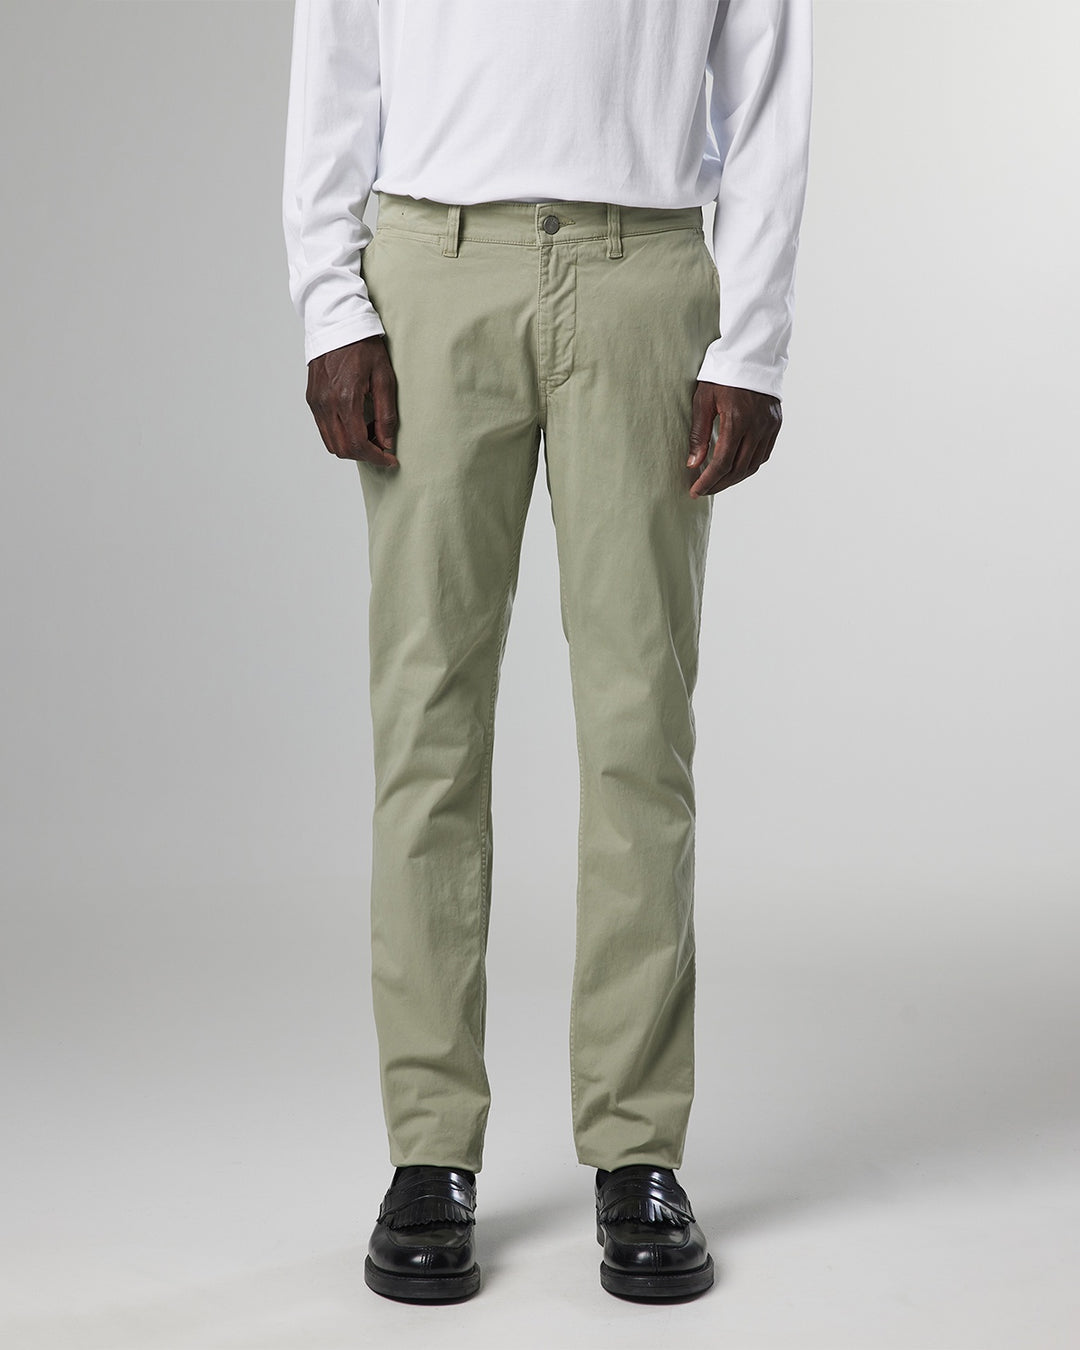 NN07 - Marco 1400 Classic Chino in Oil Green | Buster McGee